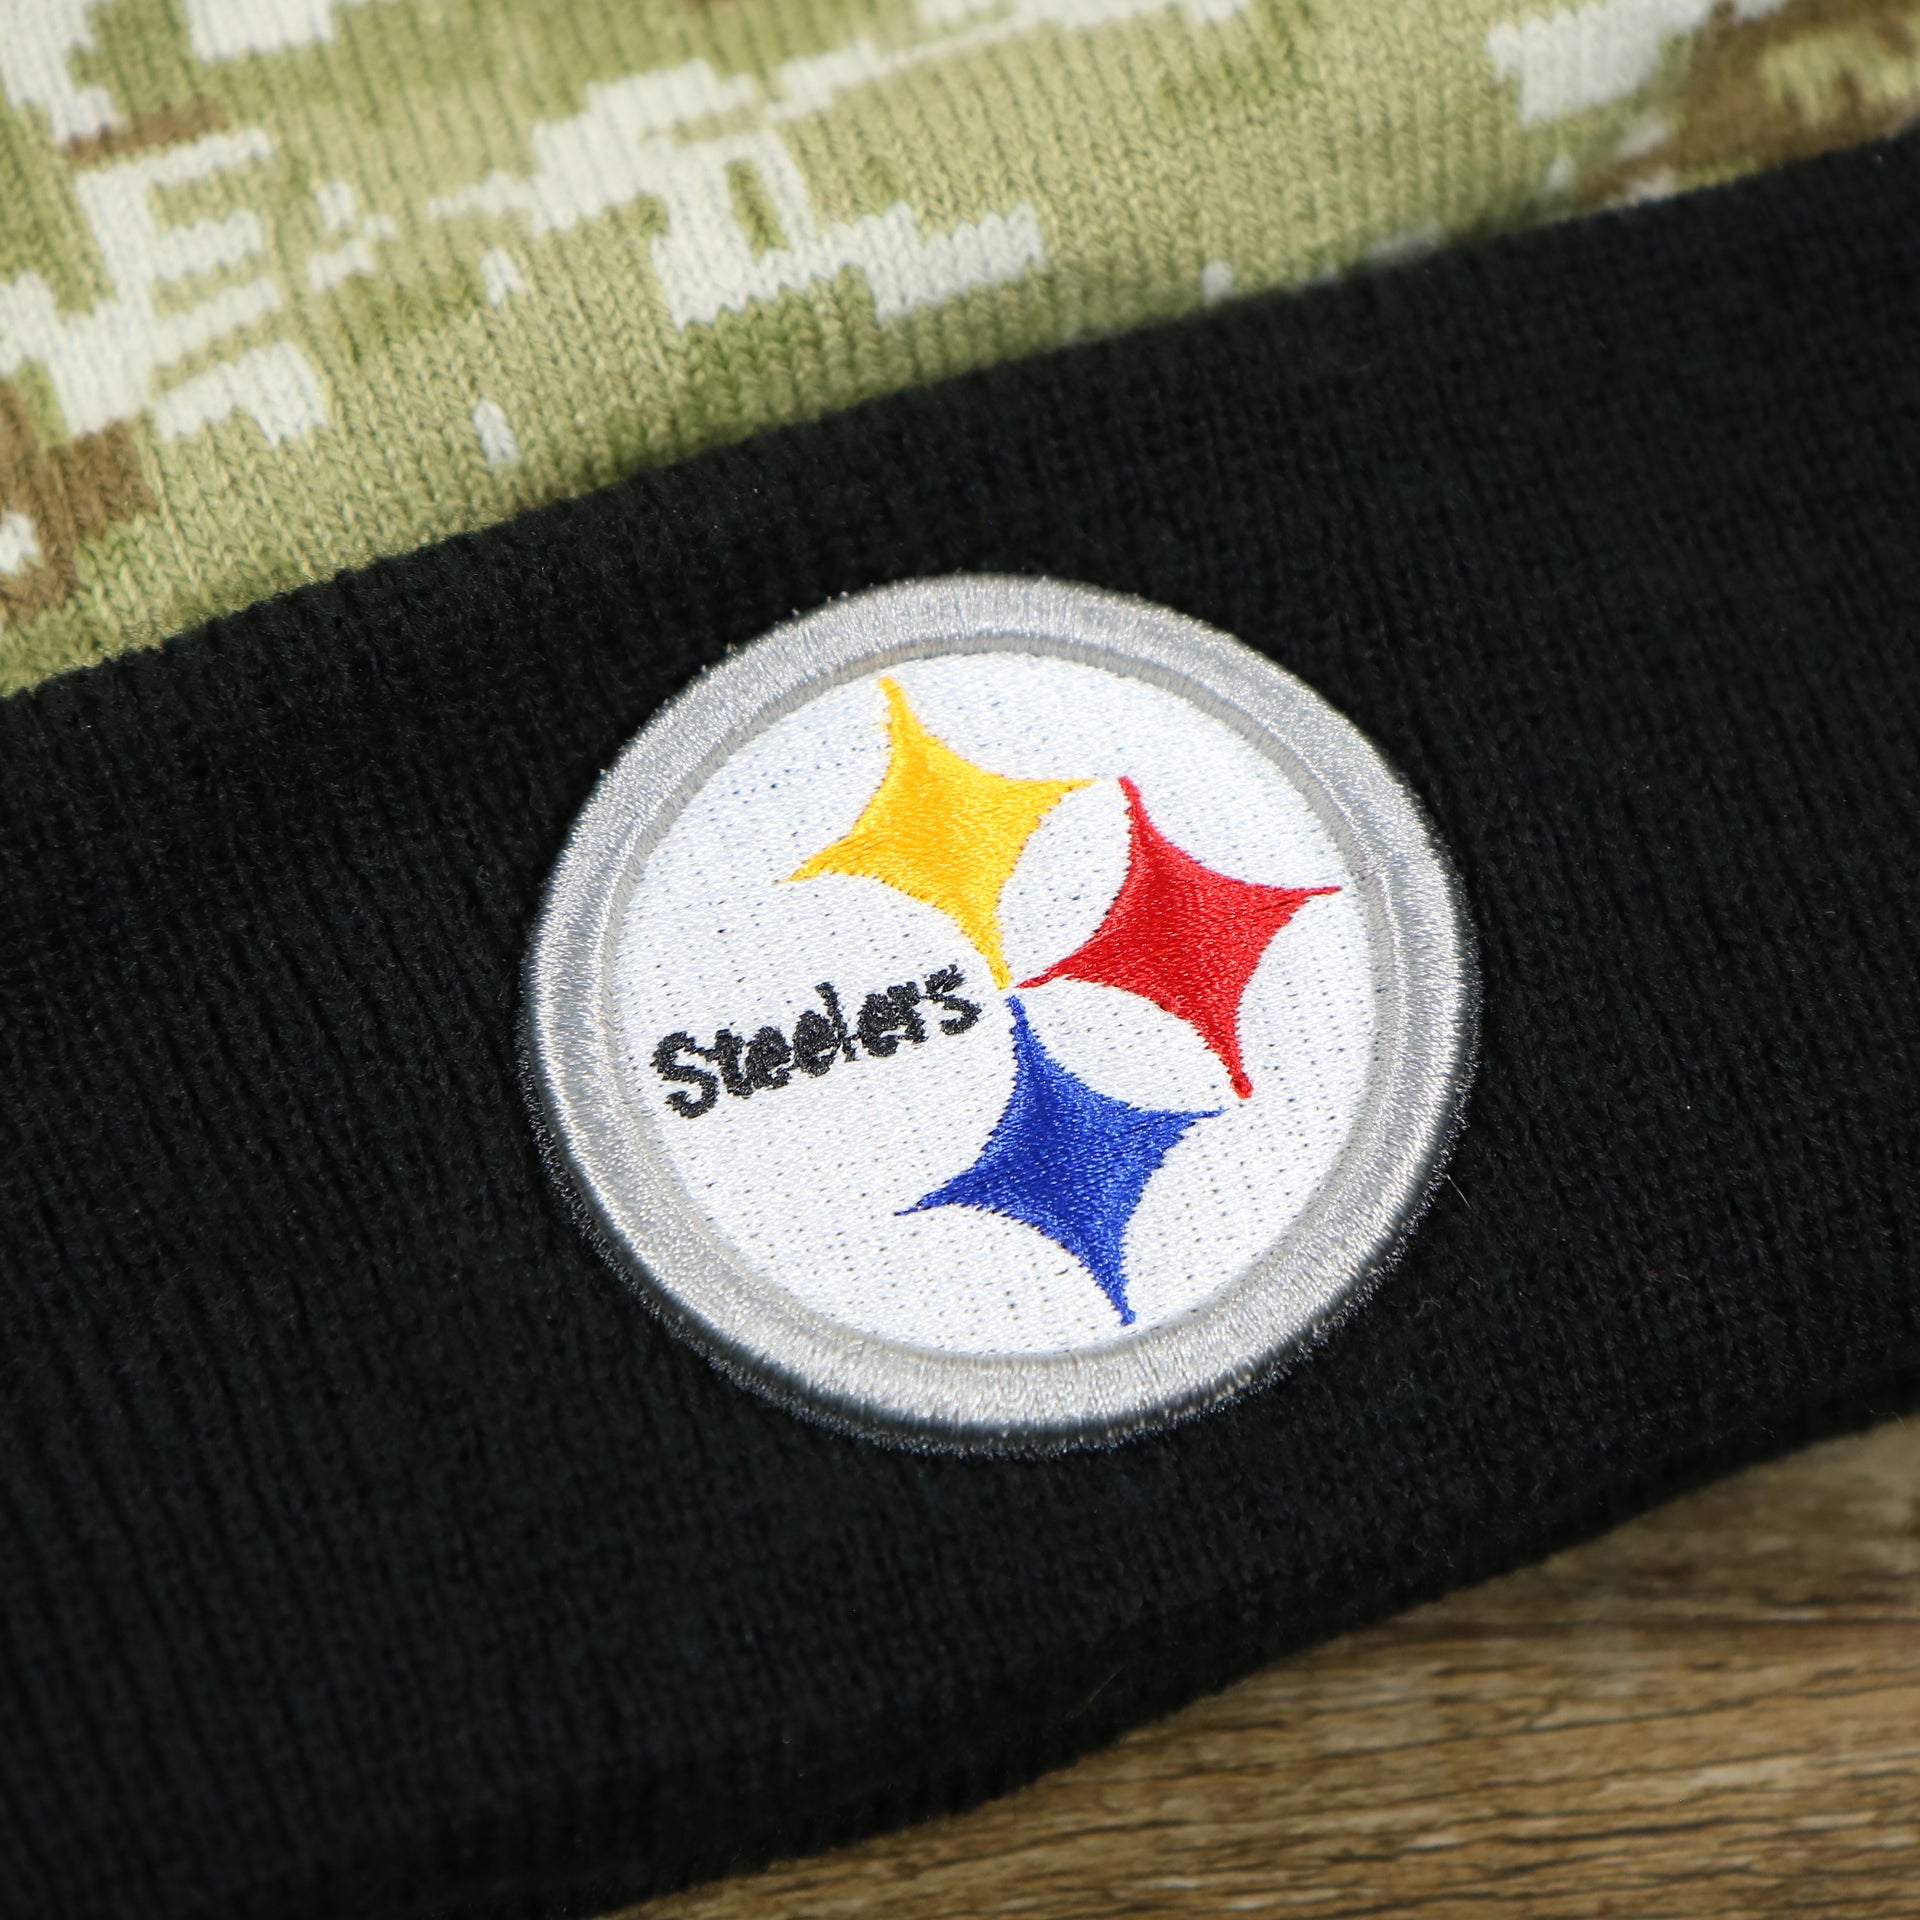 The Steelers Logo on the Pittsburgh Steelers NFL Salute To Service Cuffed Winter Beanie | Camo and Black Beanie